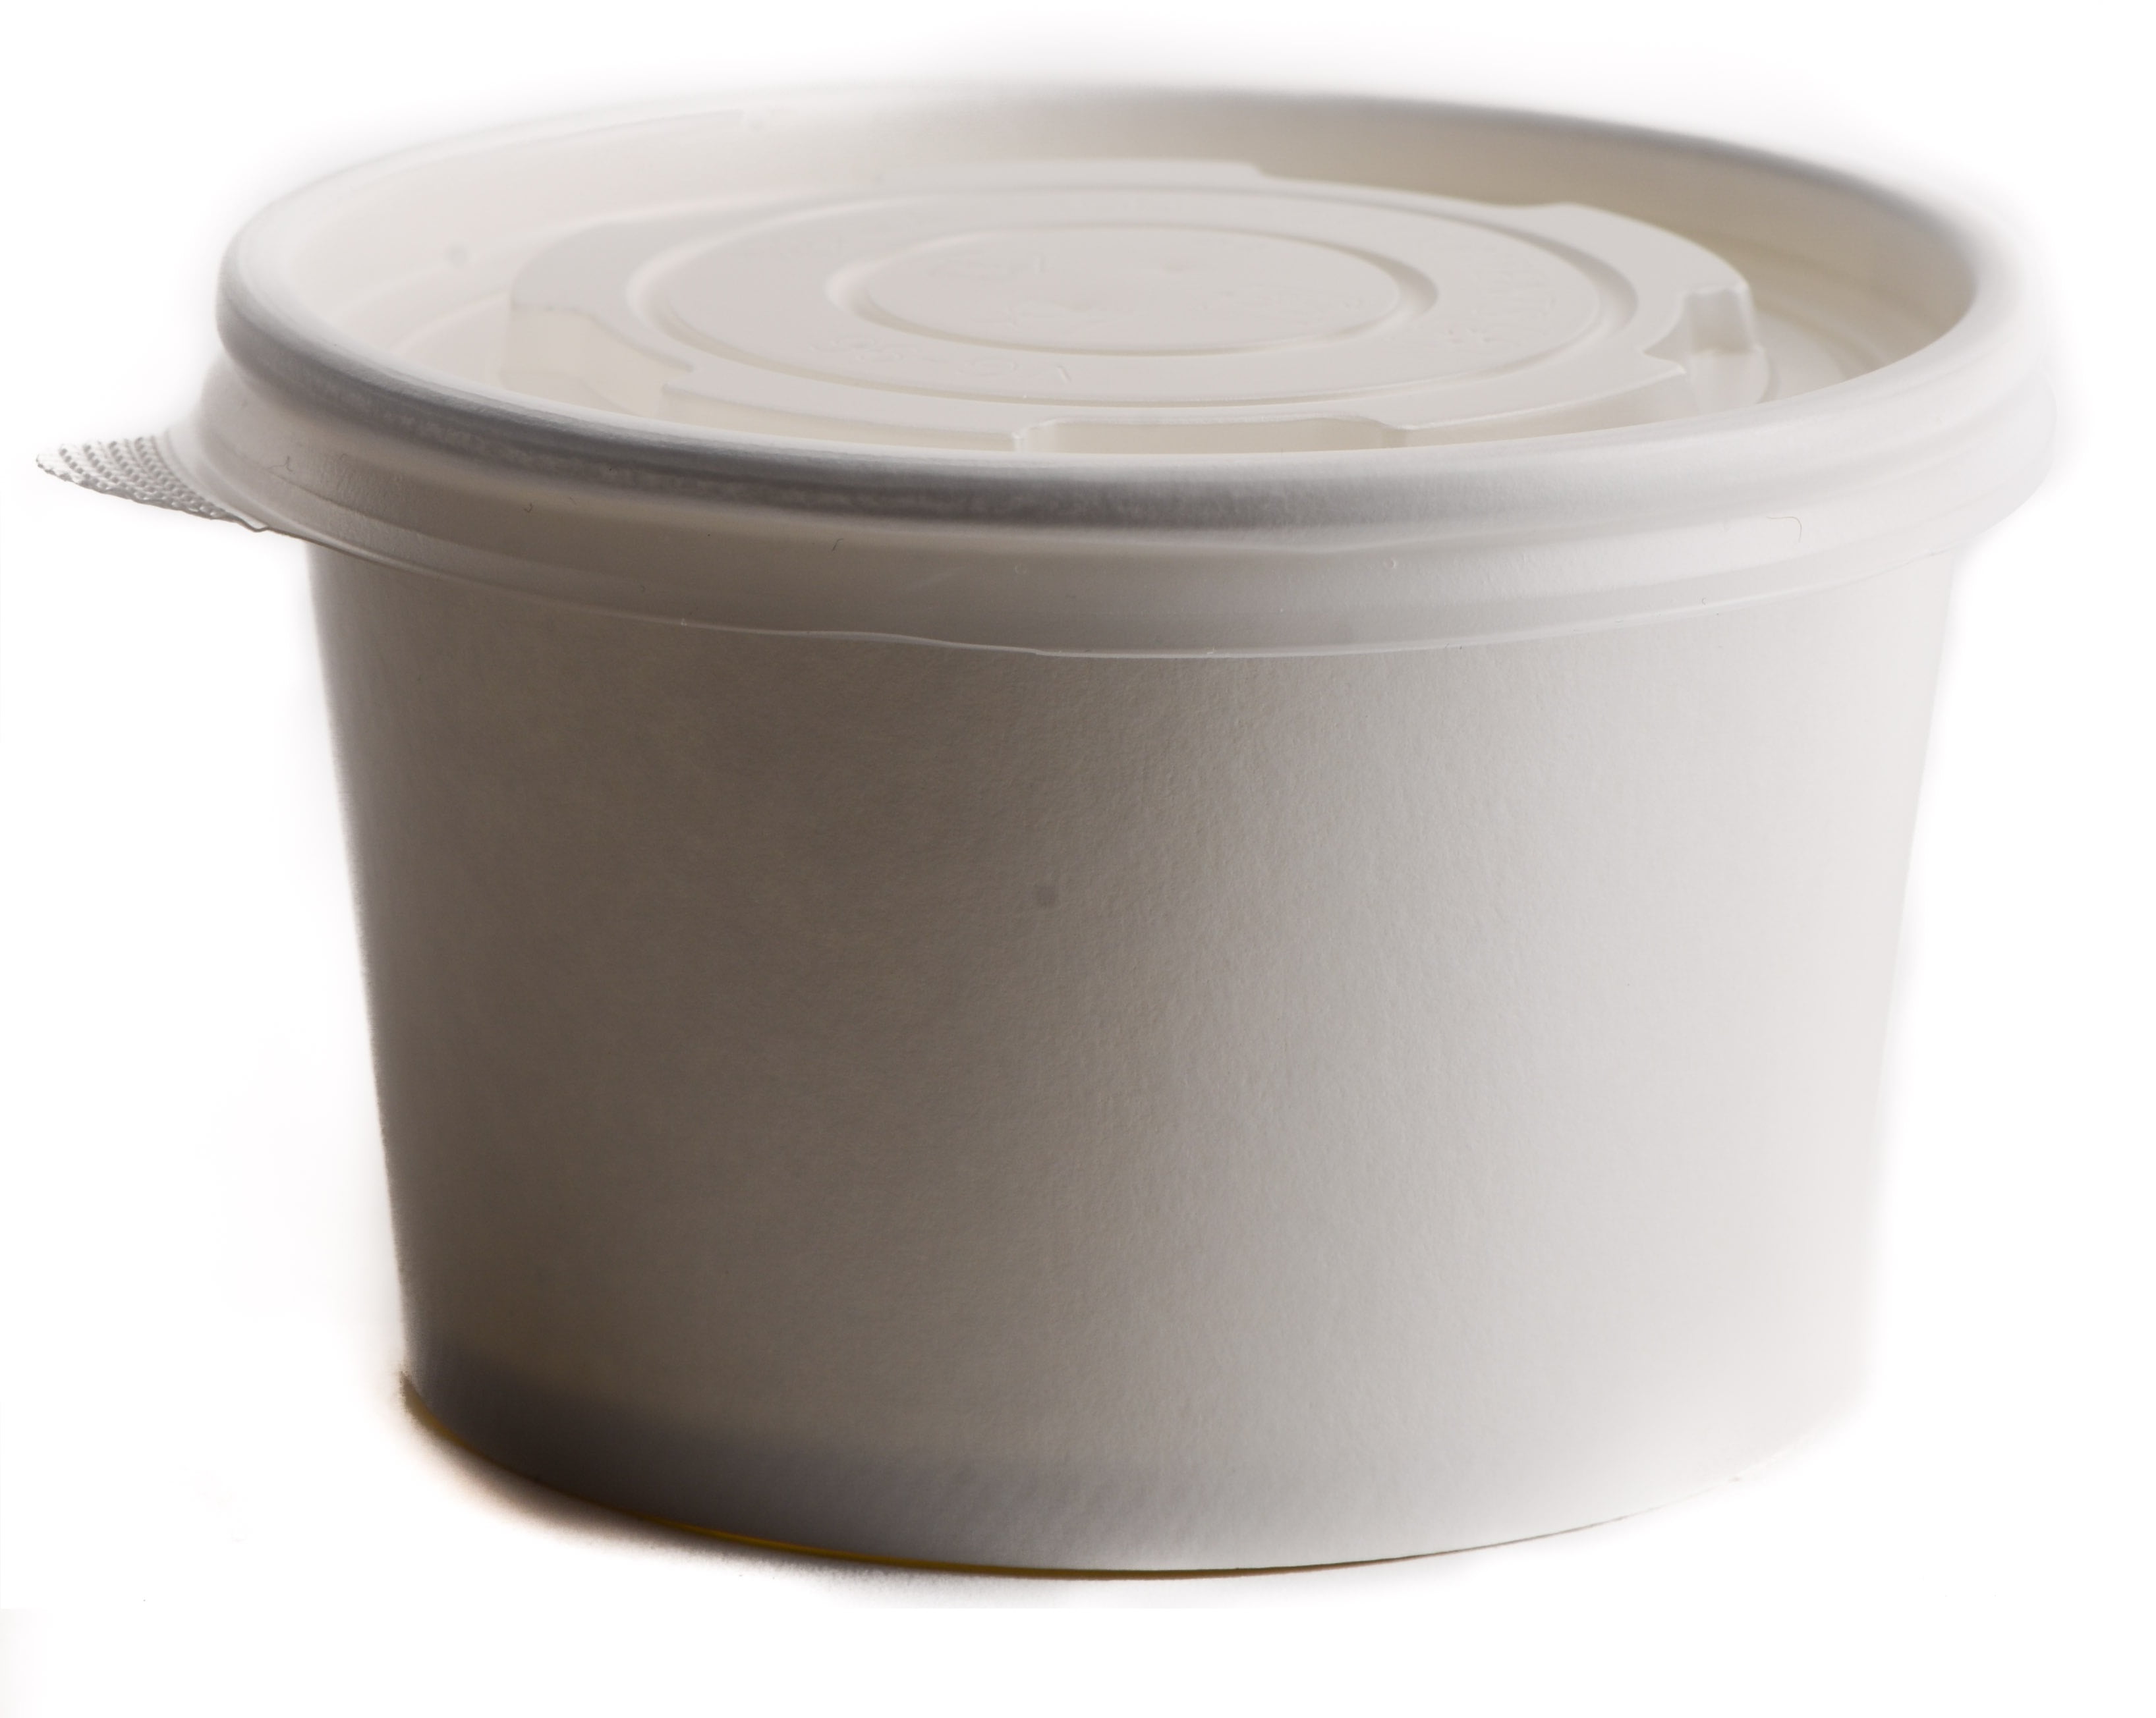 [150 Count] 12 oz Disposable White Paper Soup Containers with Plastic Lids - Half Pint Ice Cream Containers, Frozen Yogurt Cups, Restaurant